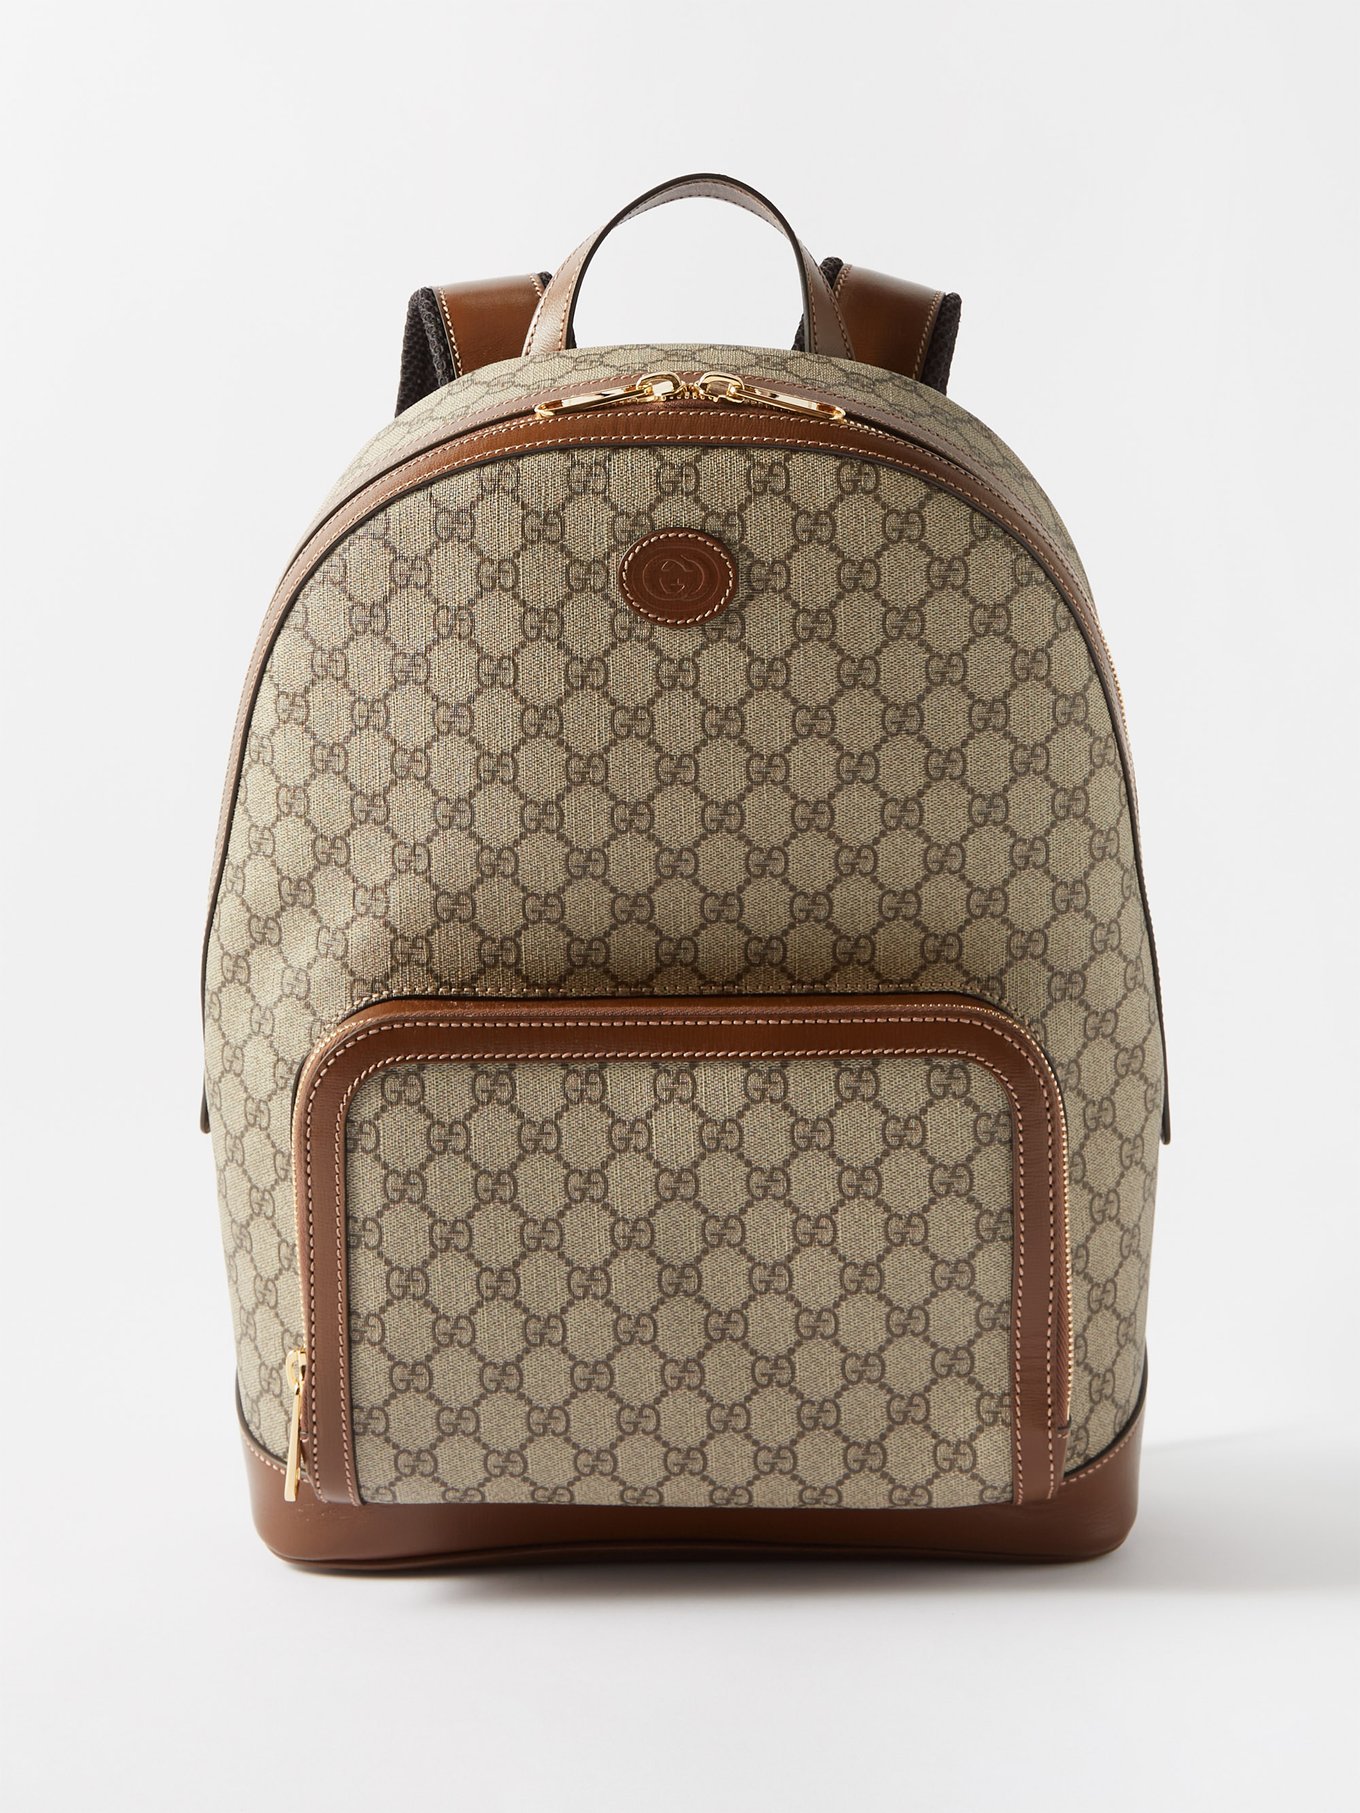 Brown GG Supreme leather-trimmed canvas backpack